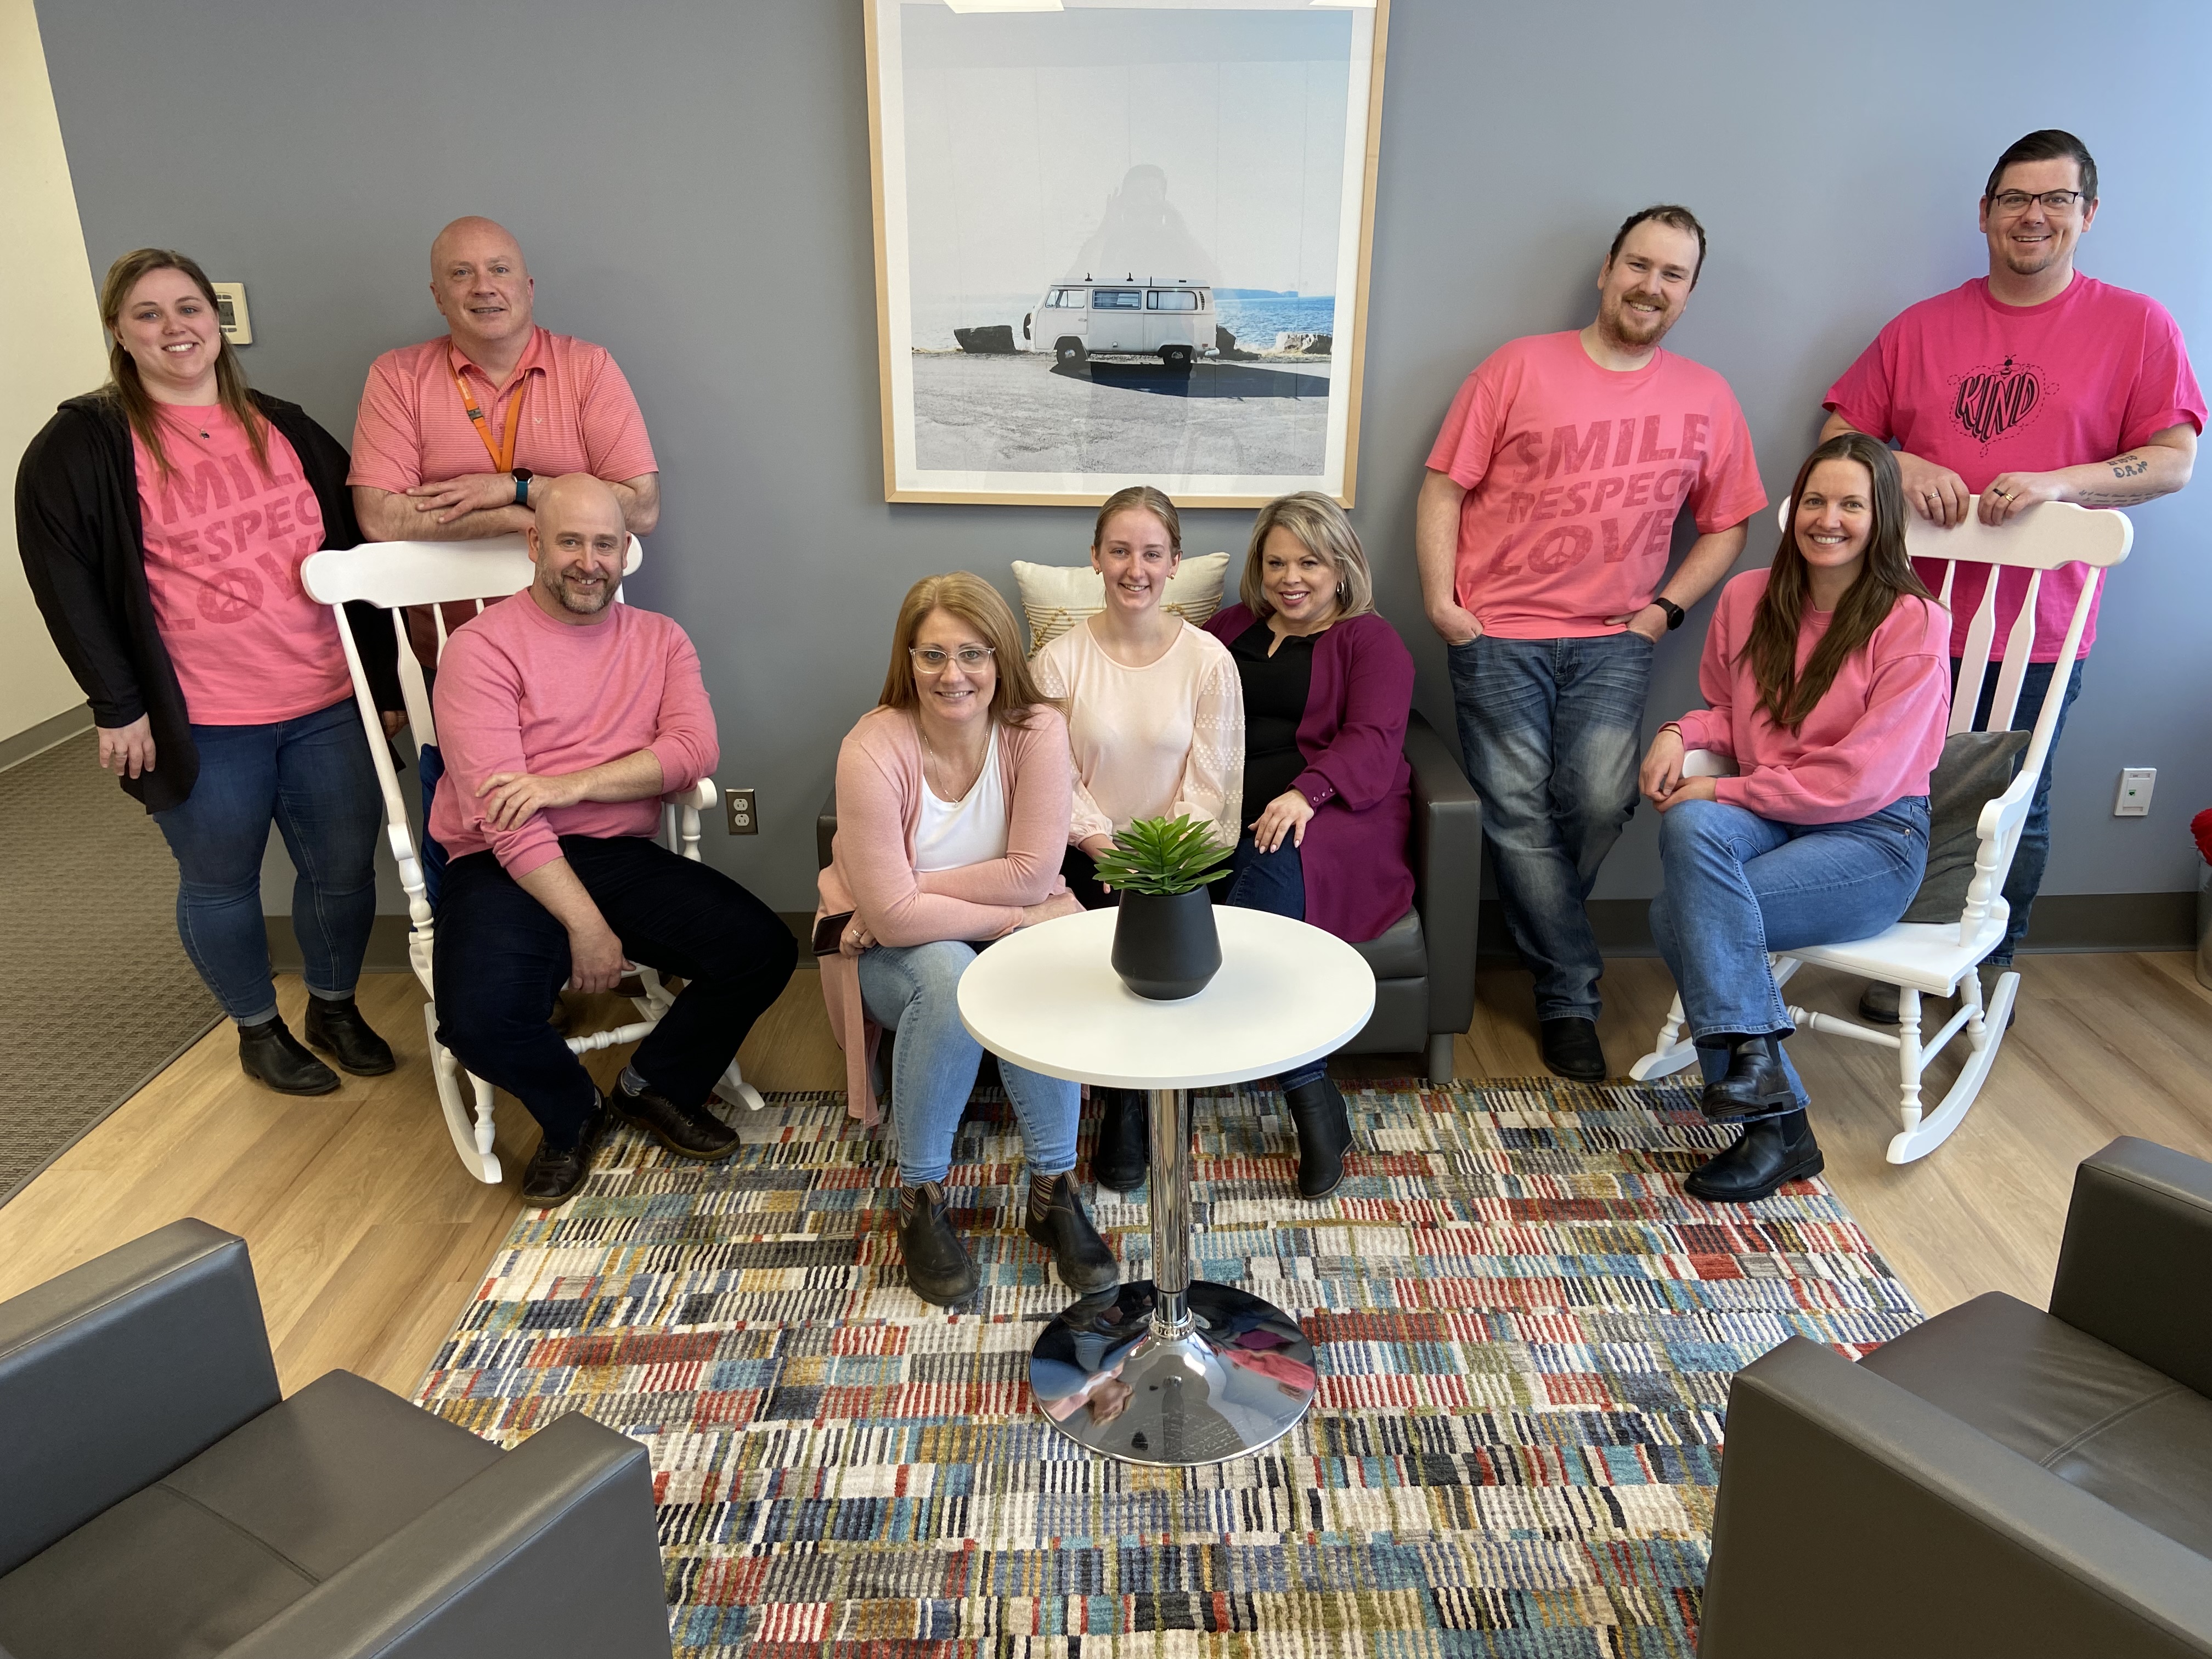 Office staff sitting on a variety of seating, smiling and wearing pink shirts.